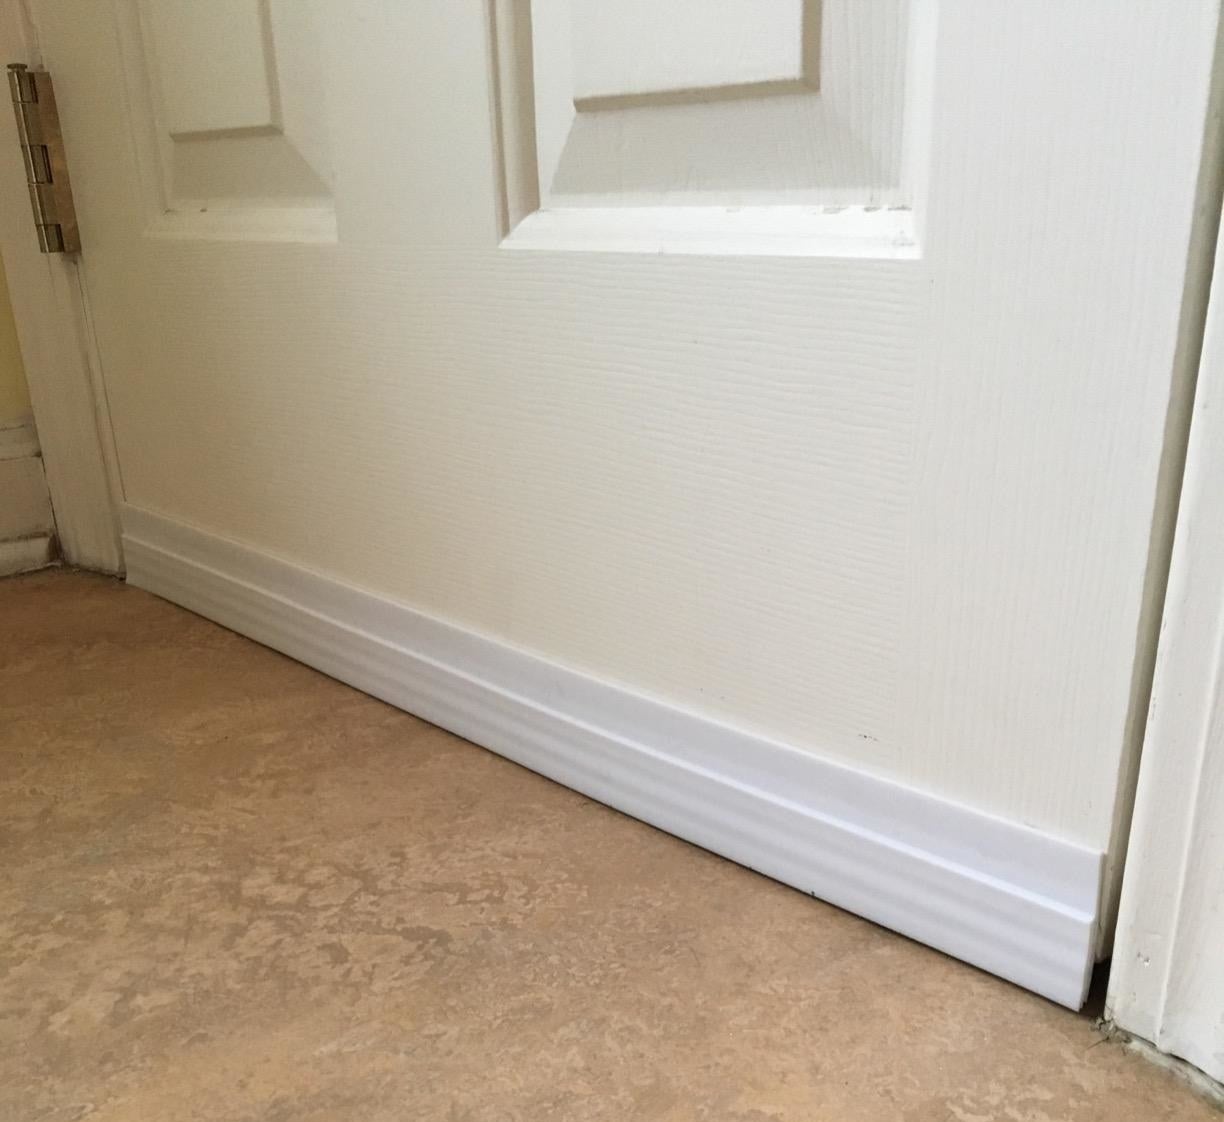 the white draft stopper installed underneath a reviewer's door